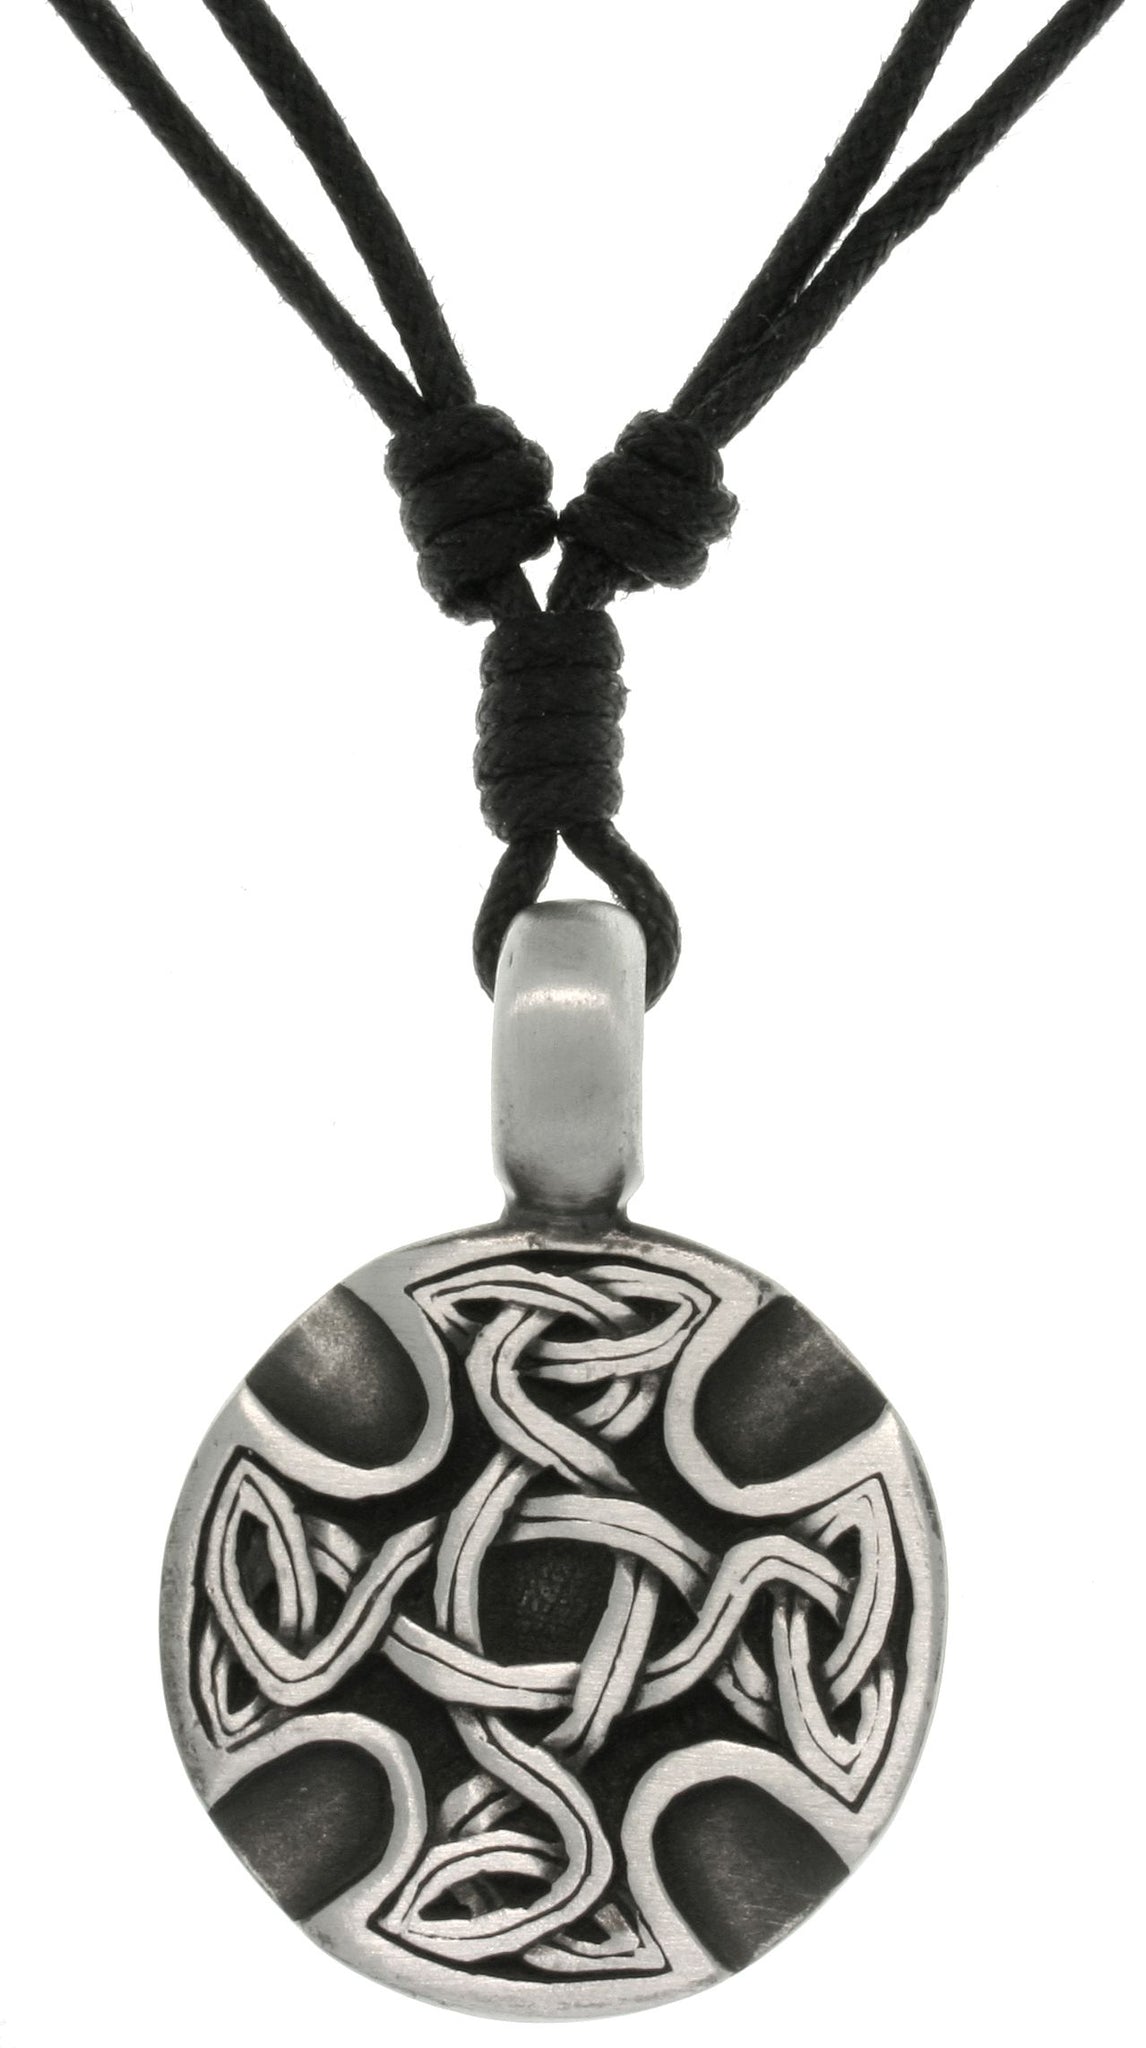 The Trend For Pendants On Cord